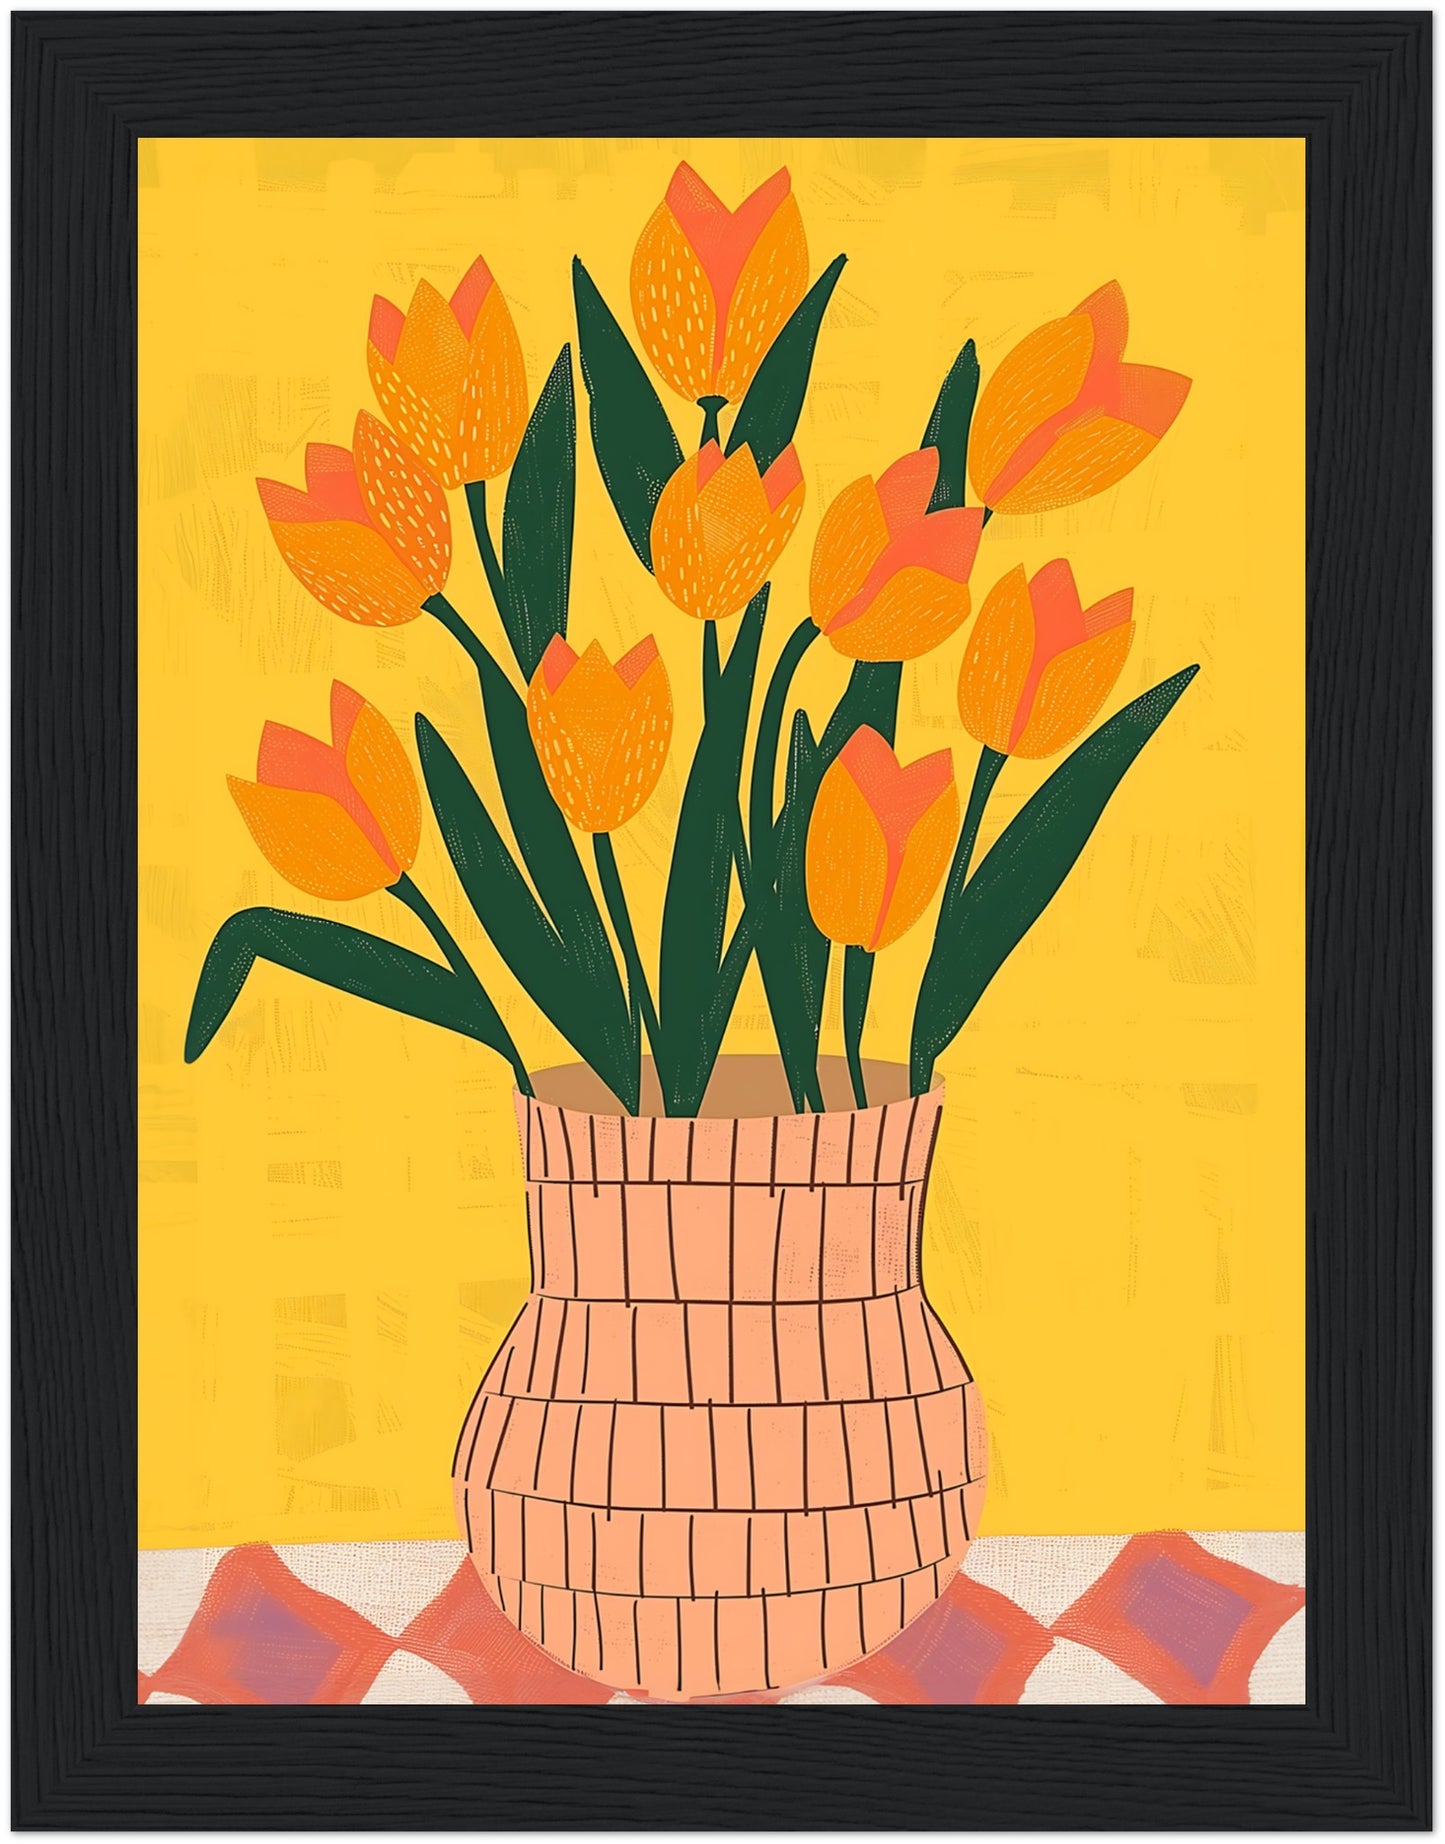 A colorful illustration of a vase with orange tulips on a yellow background.